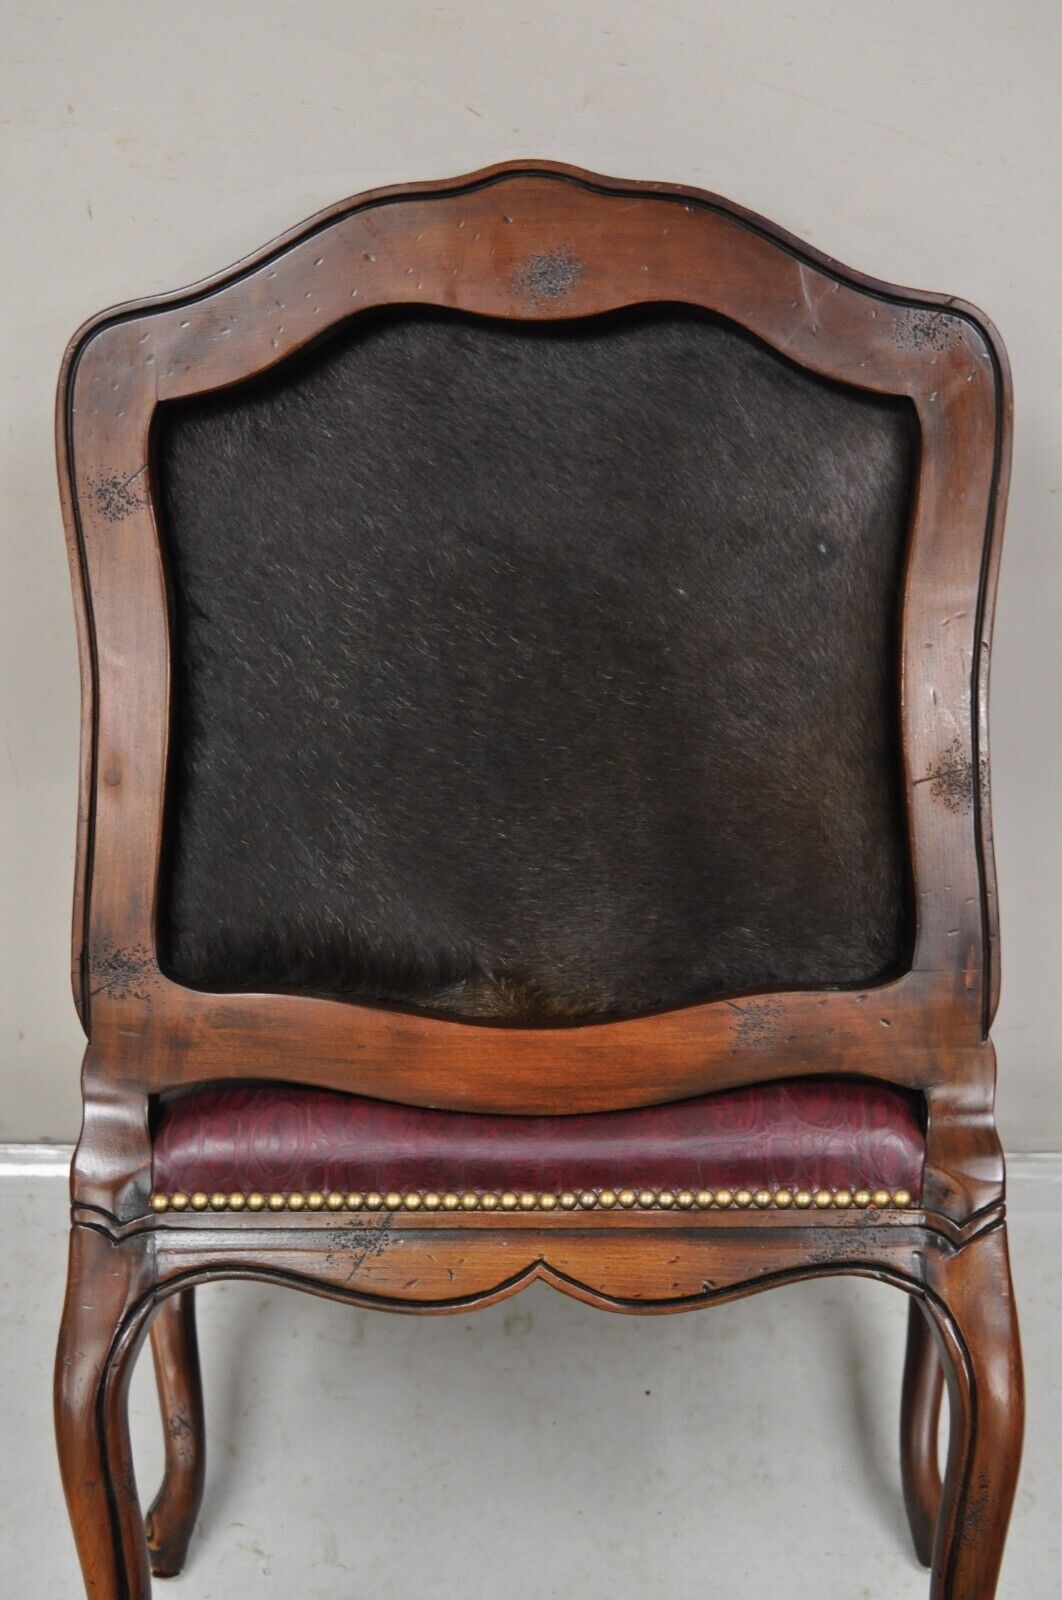 French Country Louis XV Style Burgundy Leather Faux Reptile Cowhide Armchair